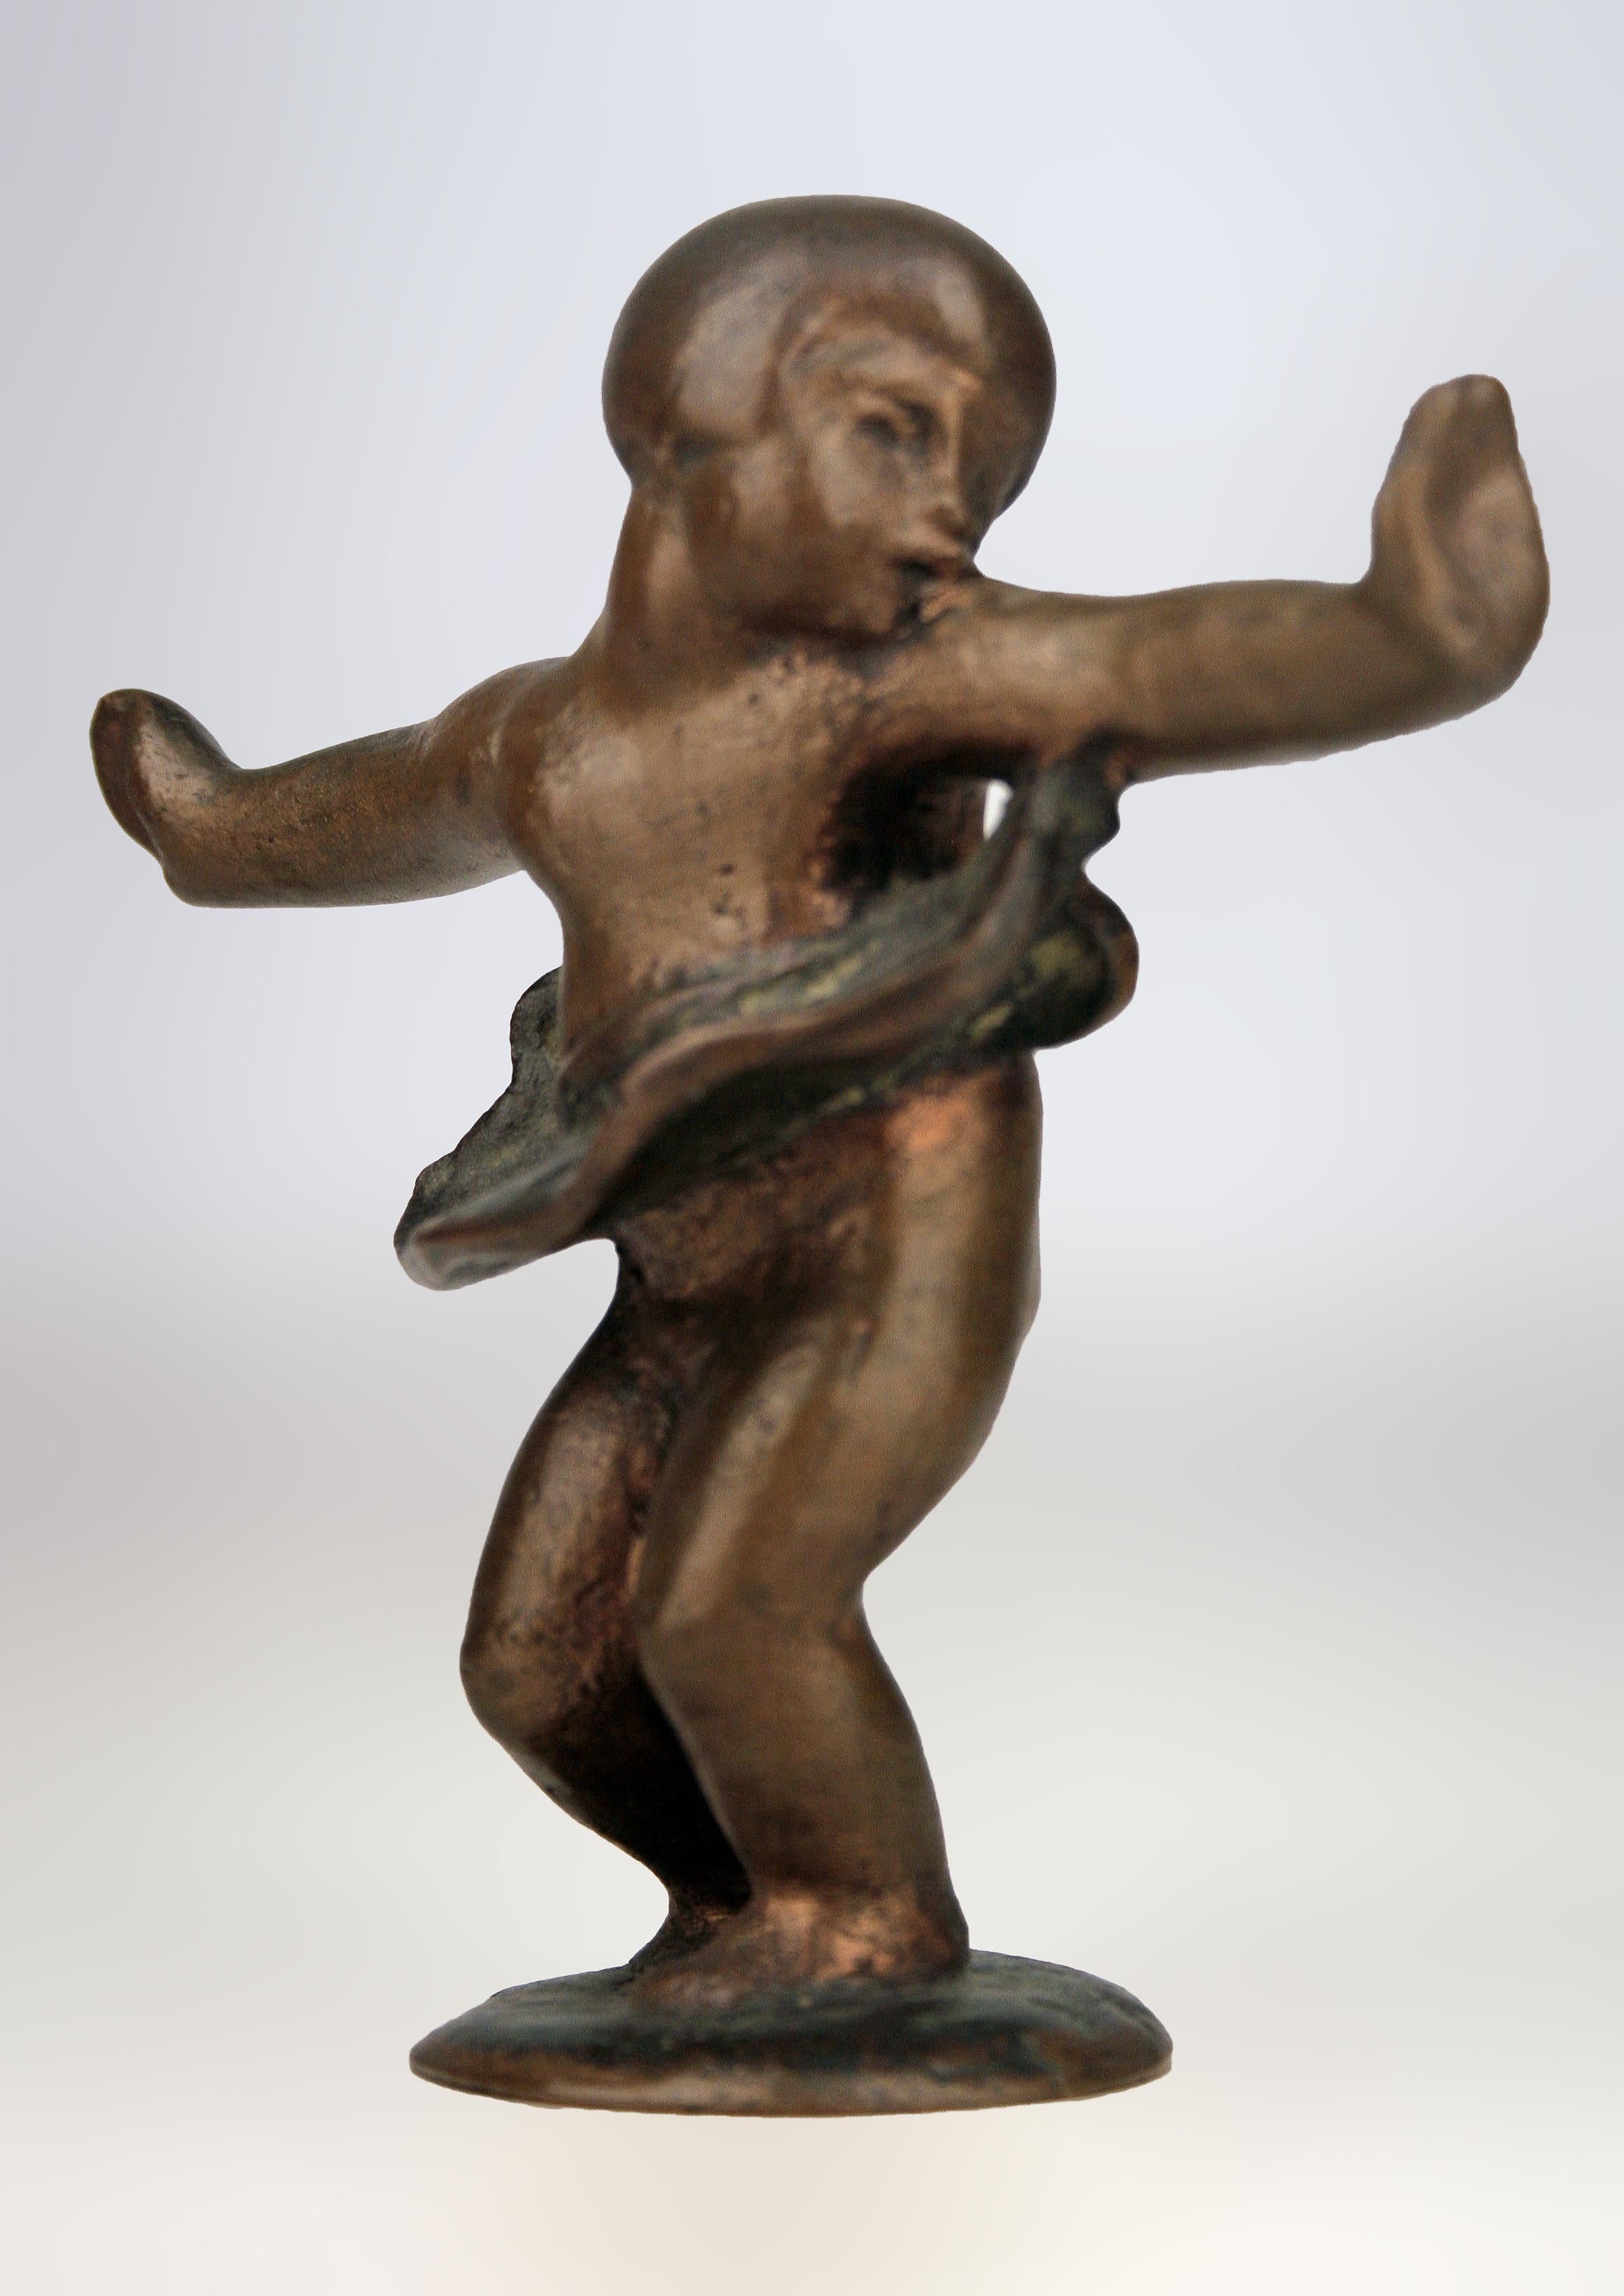 Molded Early 20th Century Art Déco Small Bronze Sculpture of Girl with Skirt Dancing For Sale